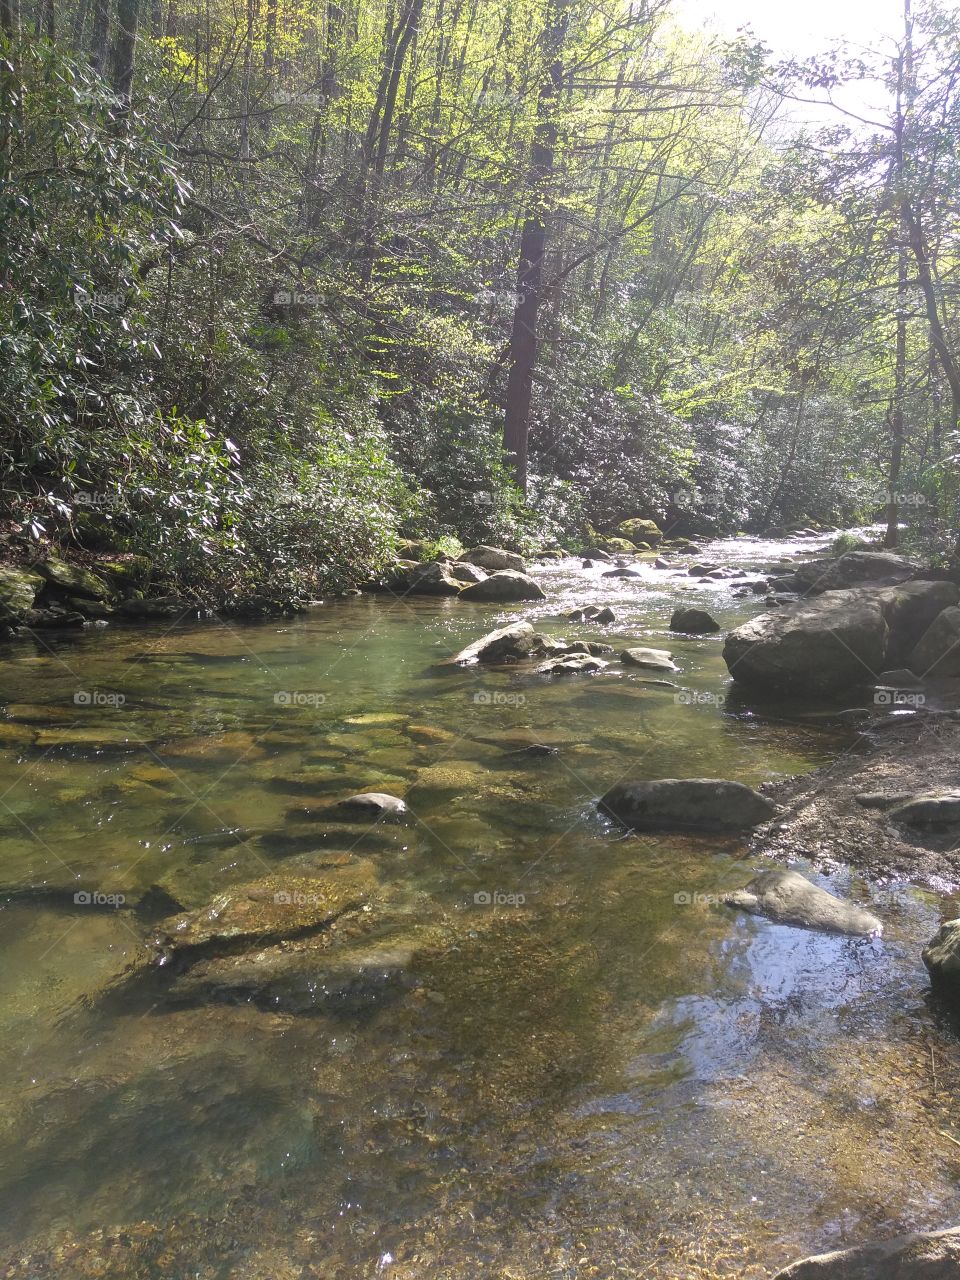 Just looking at this picture can almost make you imagine what this beautiful creek sounds like.